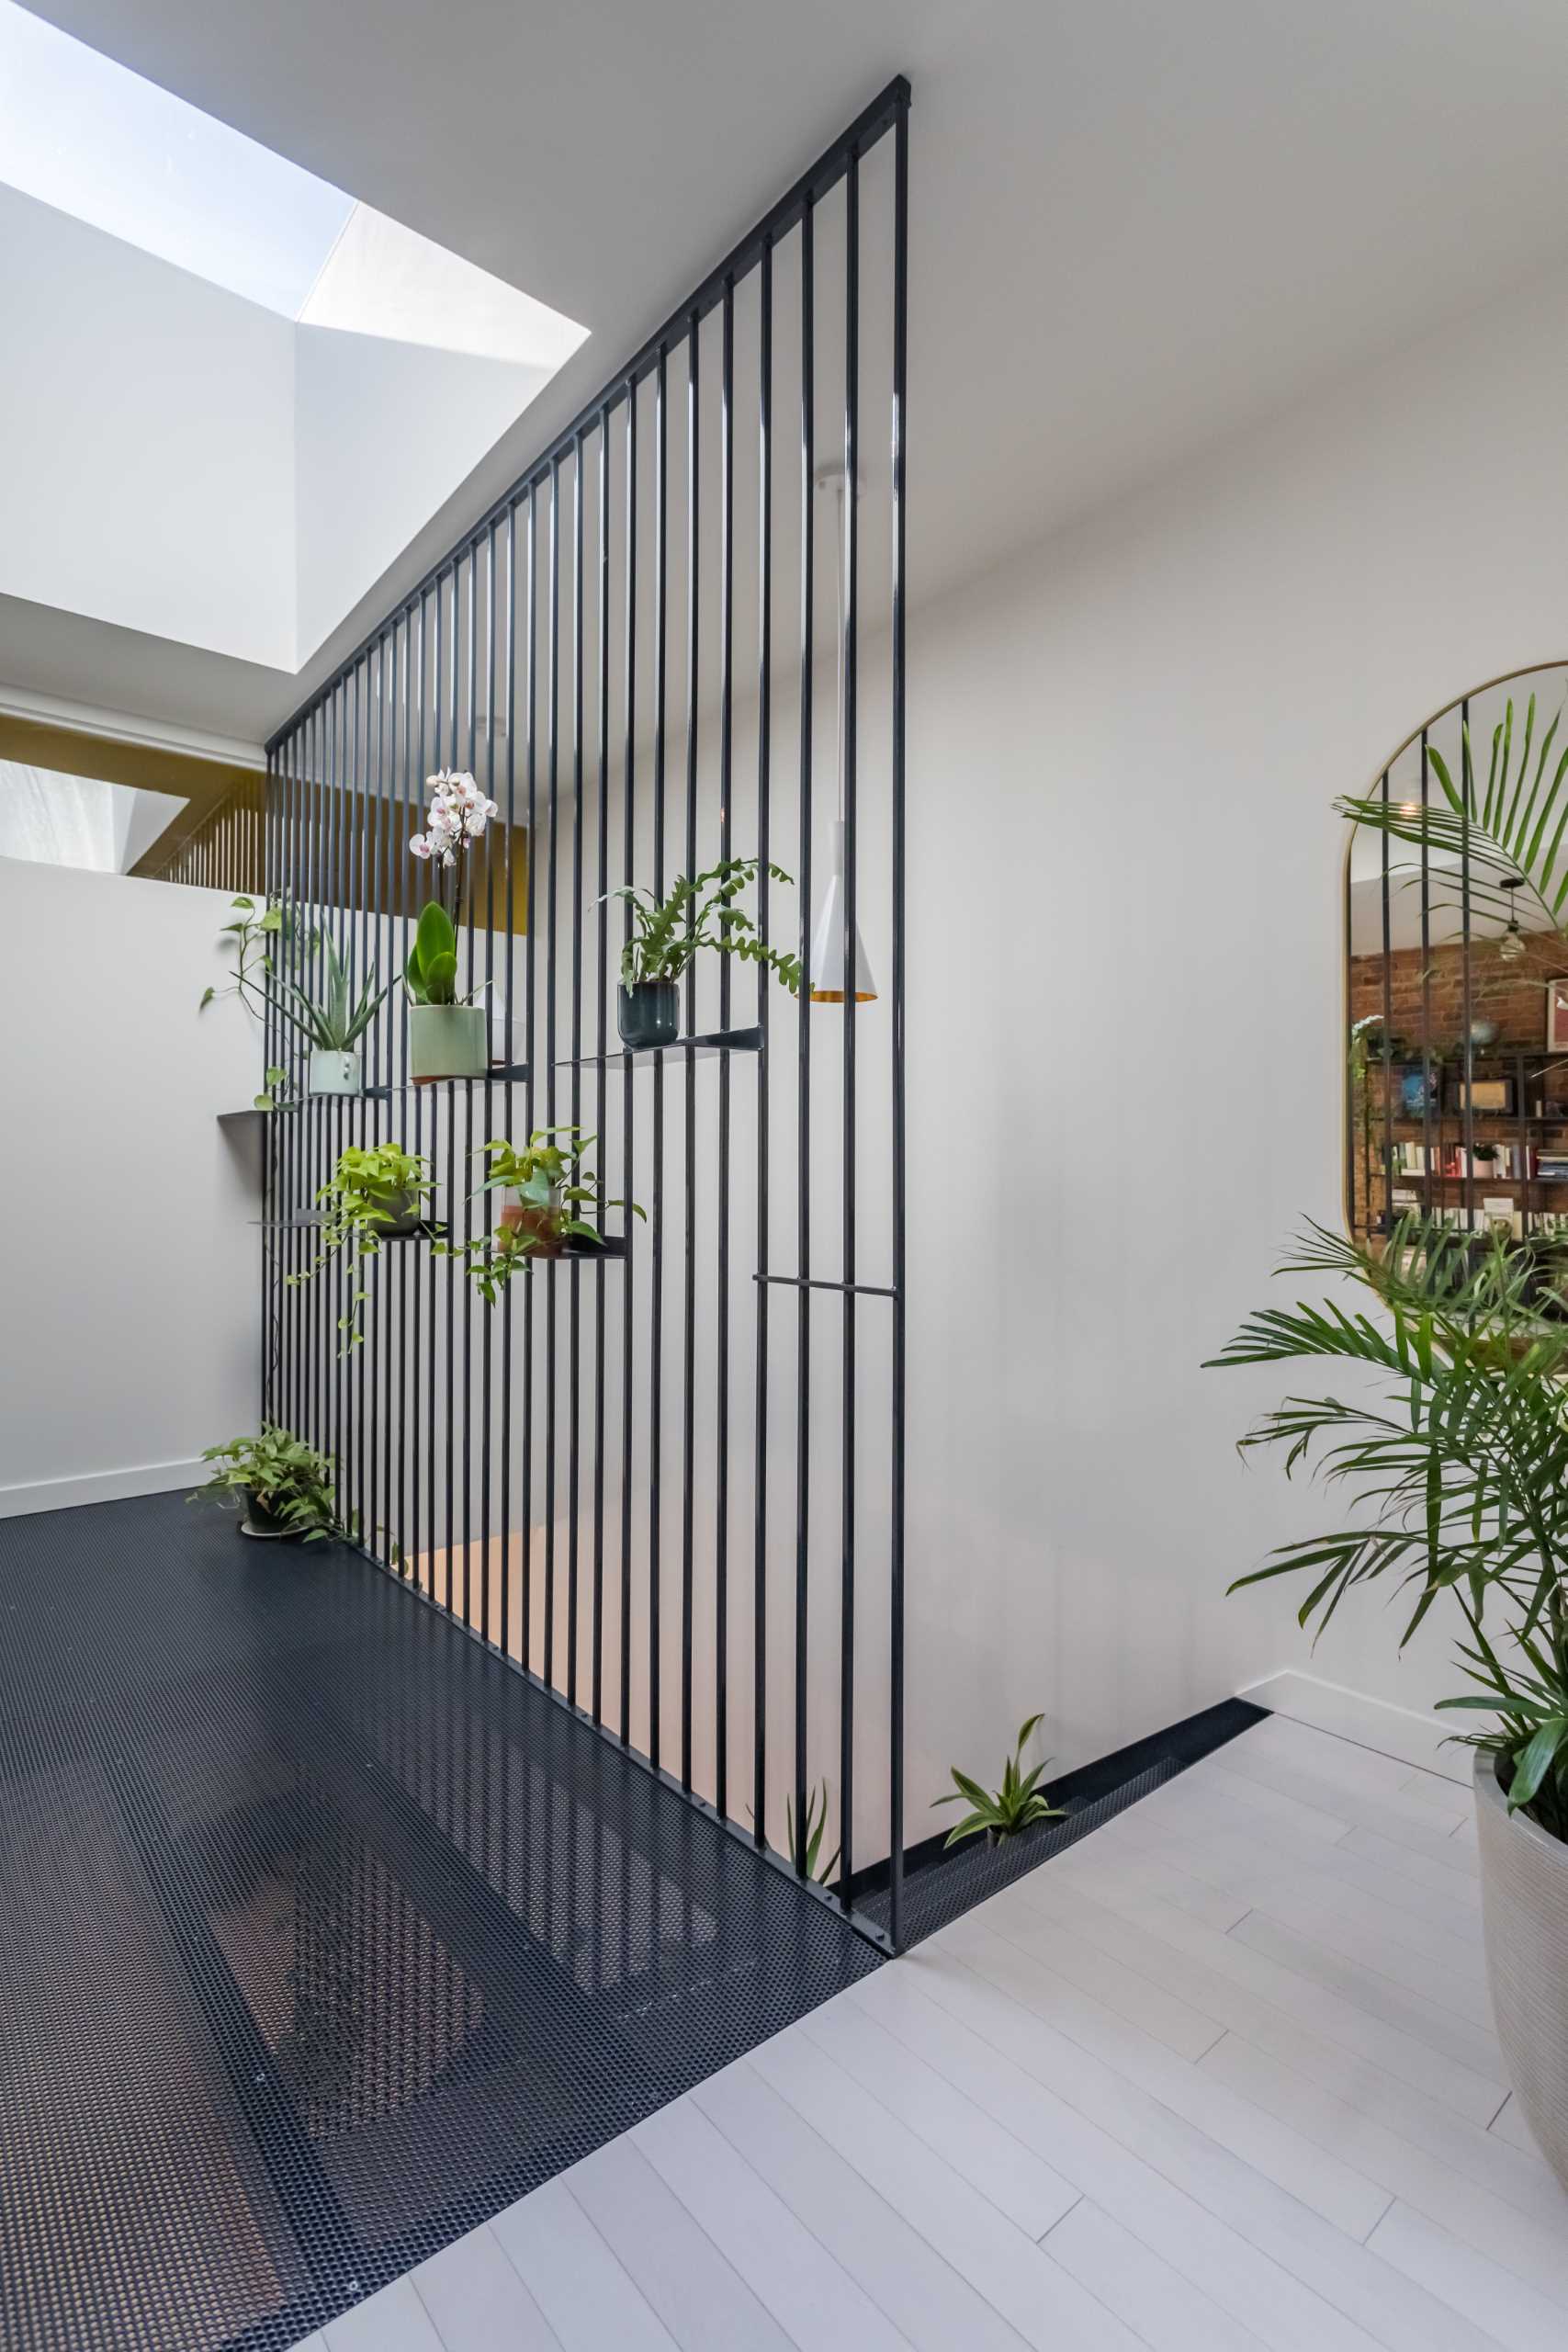 The metal screen from the lower level continues through to the upper level and includes shelves for plants.